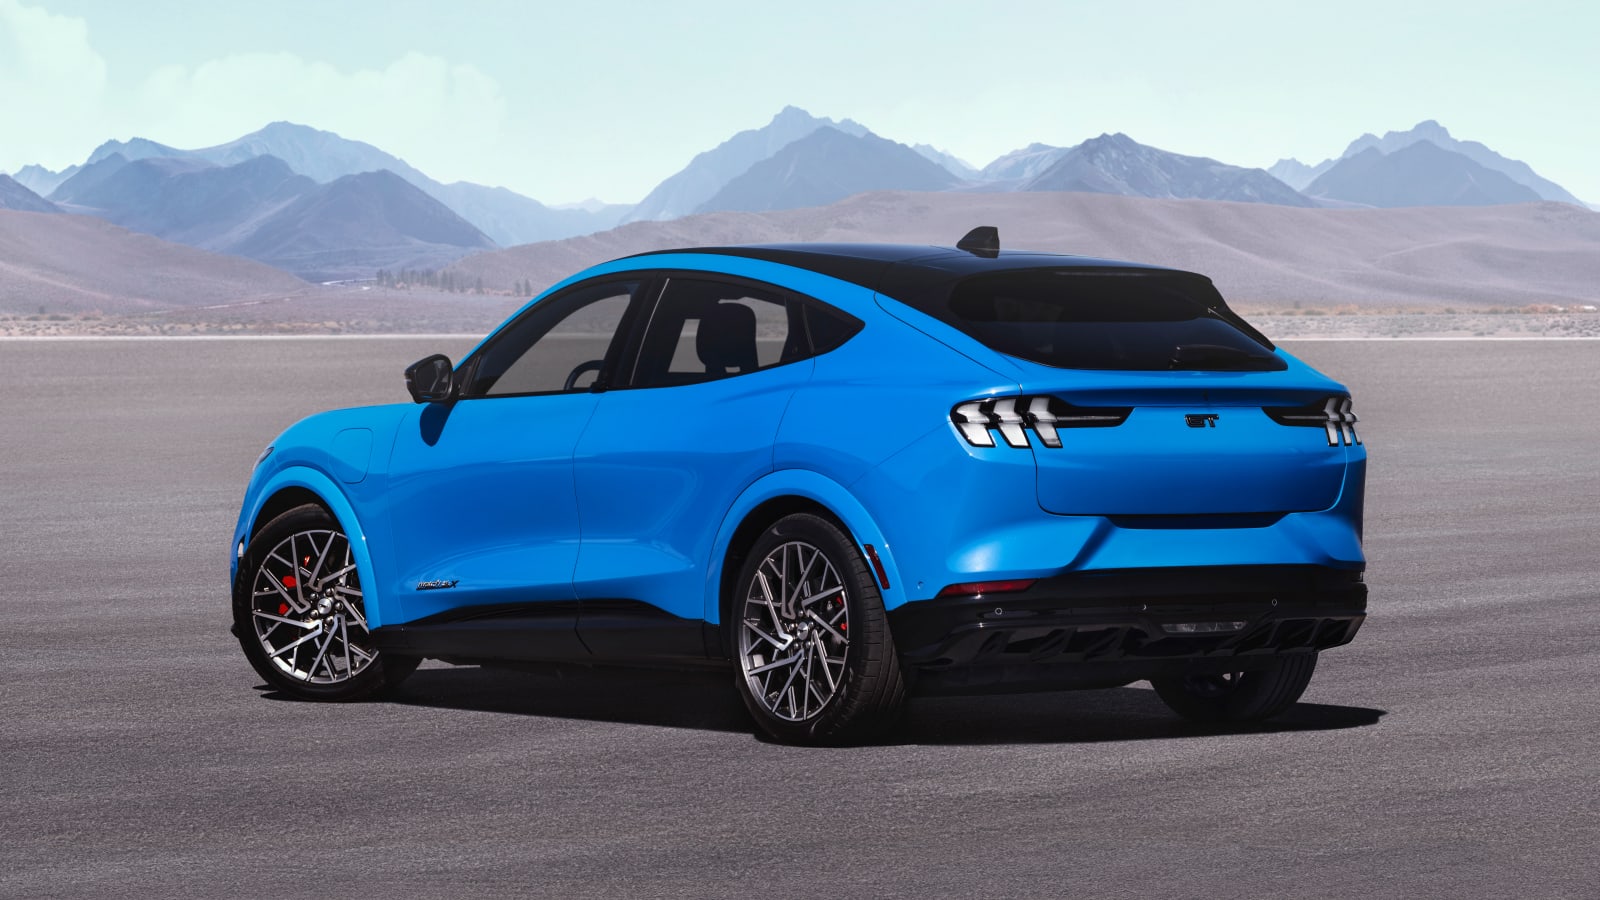 21 Ford Mustang Mach E Gt Final Epa Range Estimates Are Higher Than Predicted News Concerns